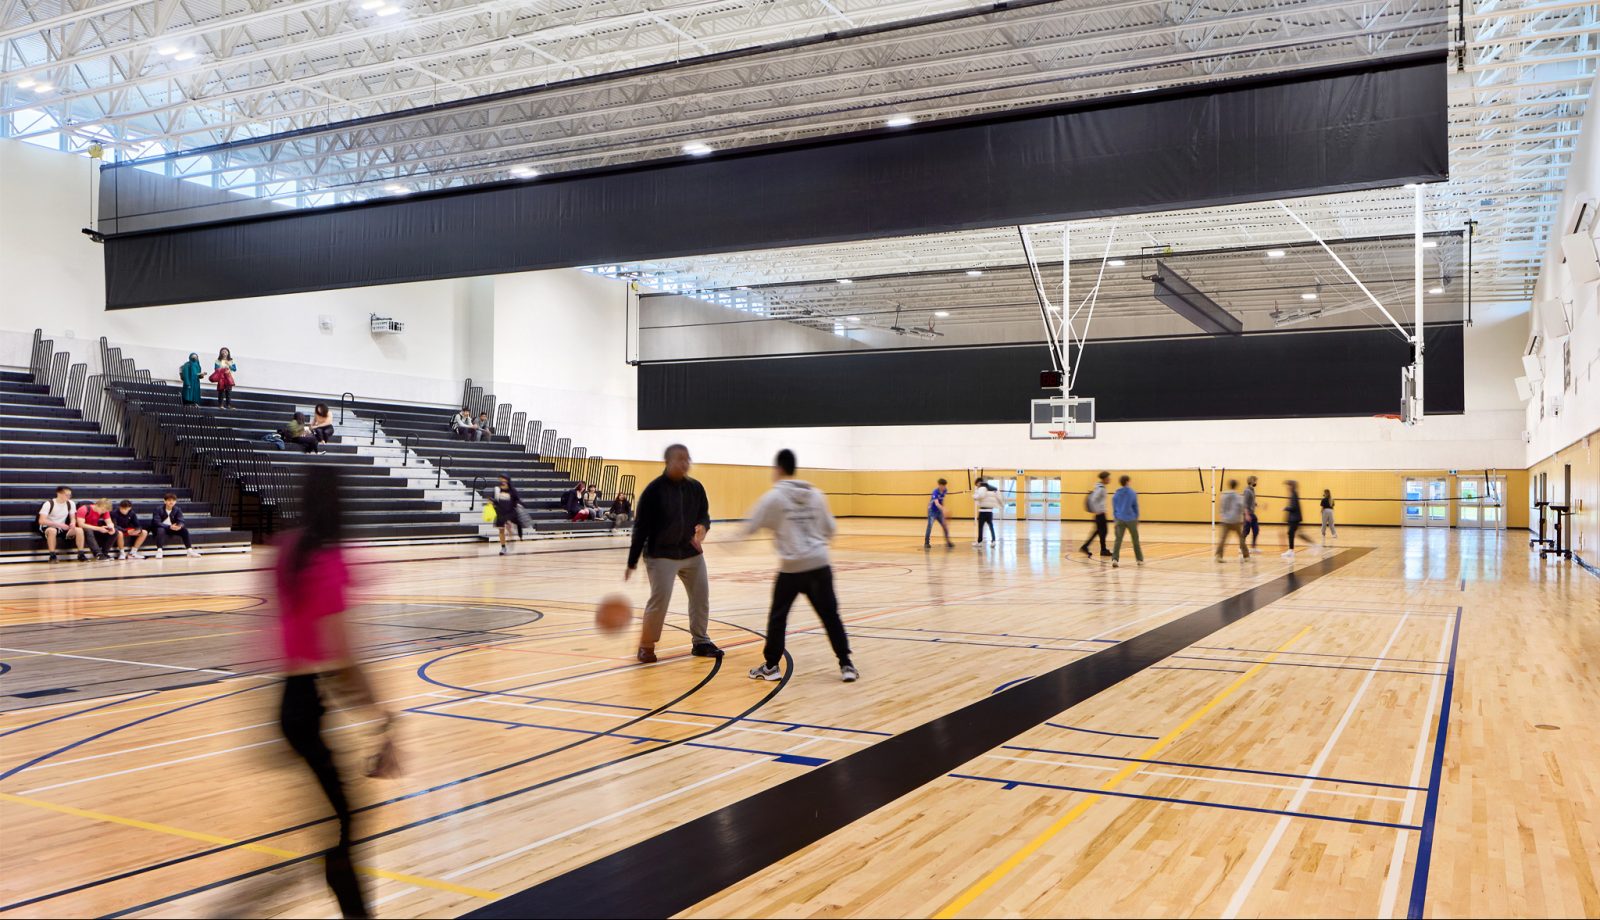 Gym at New Westminster Secondary